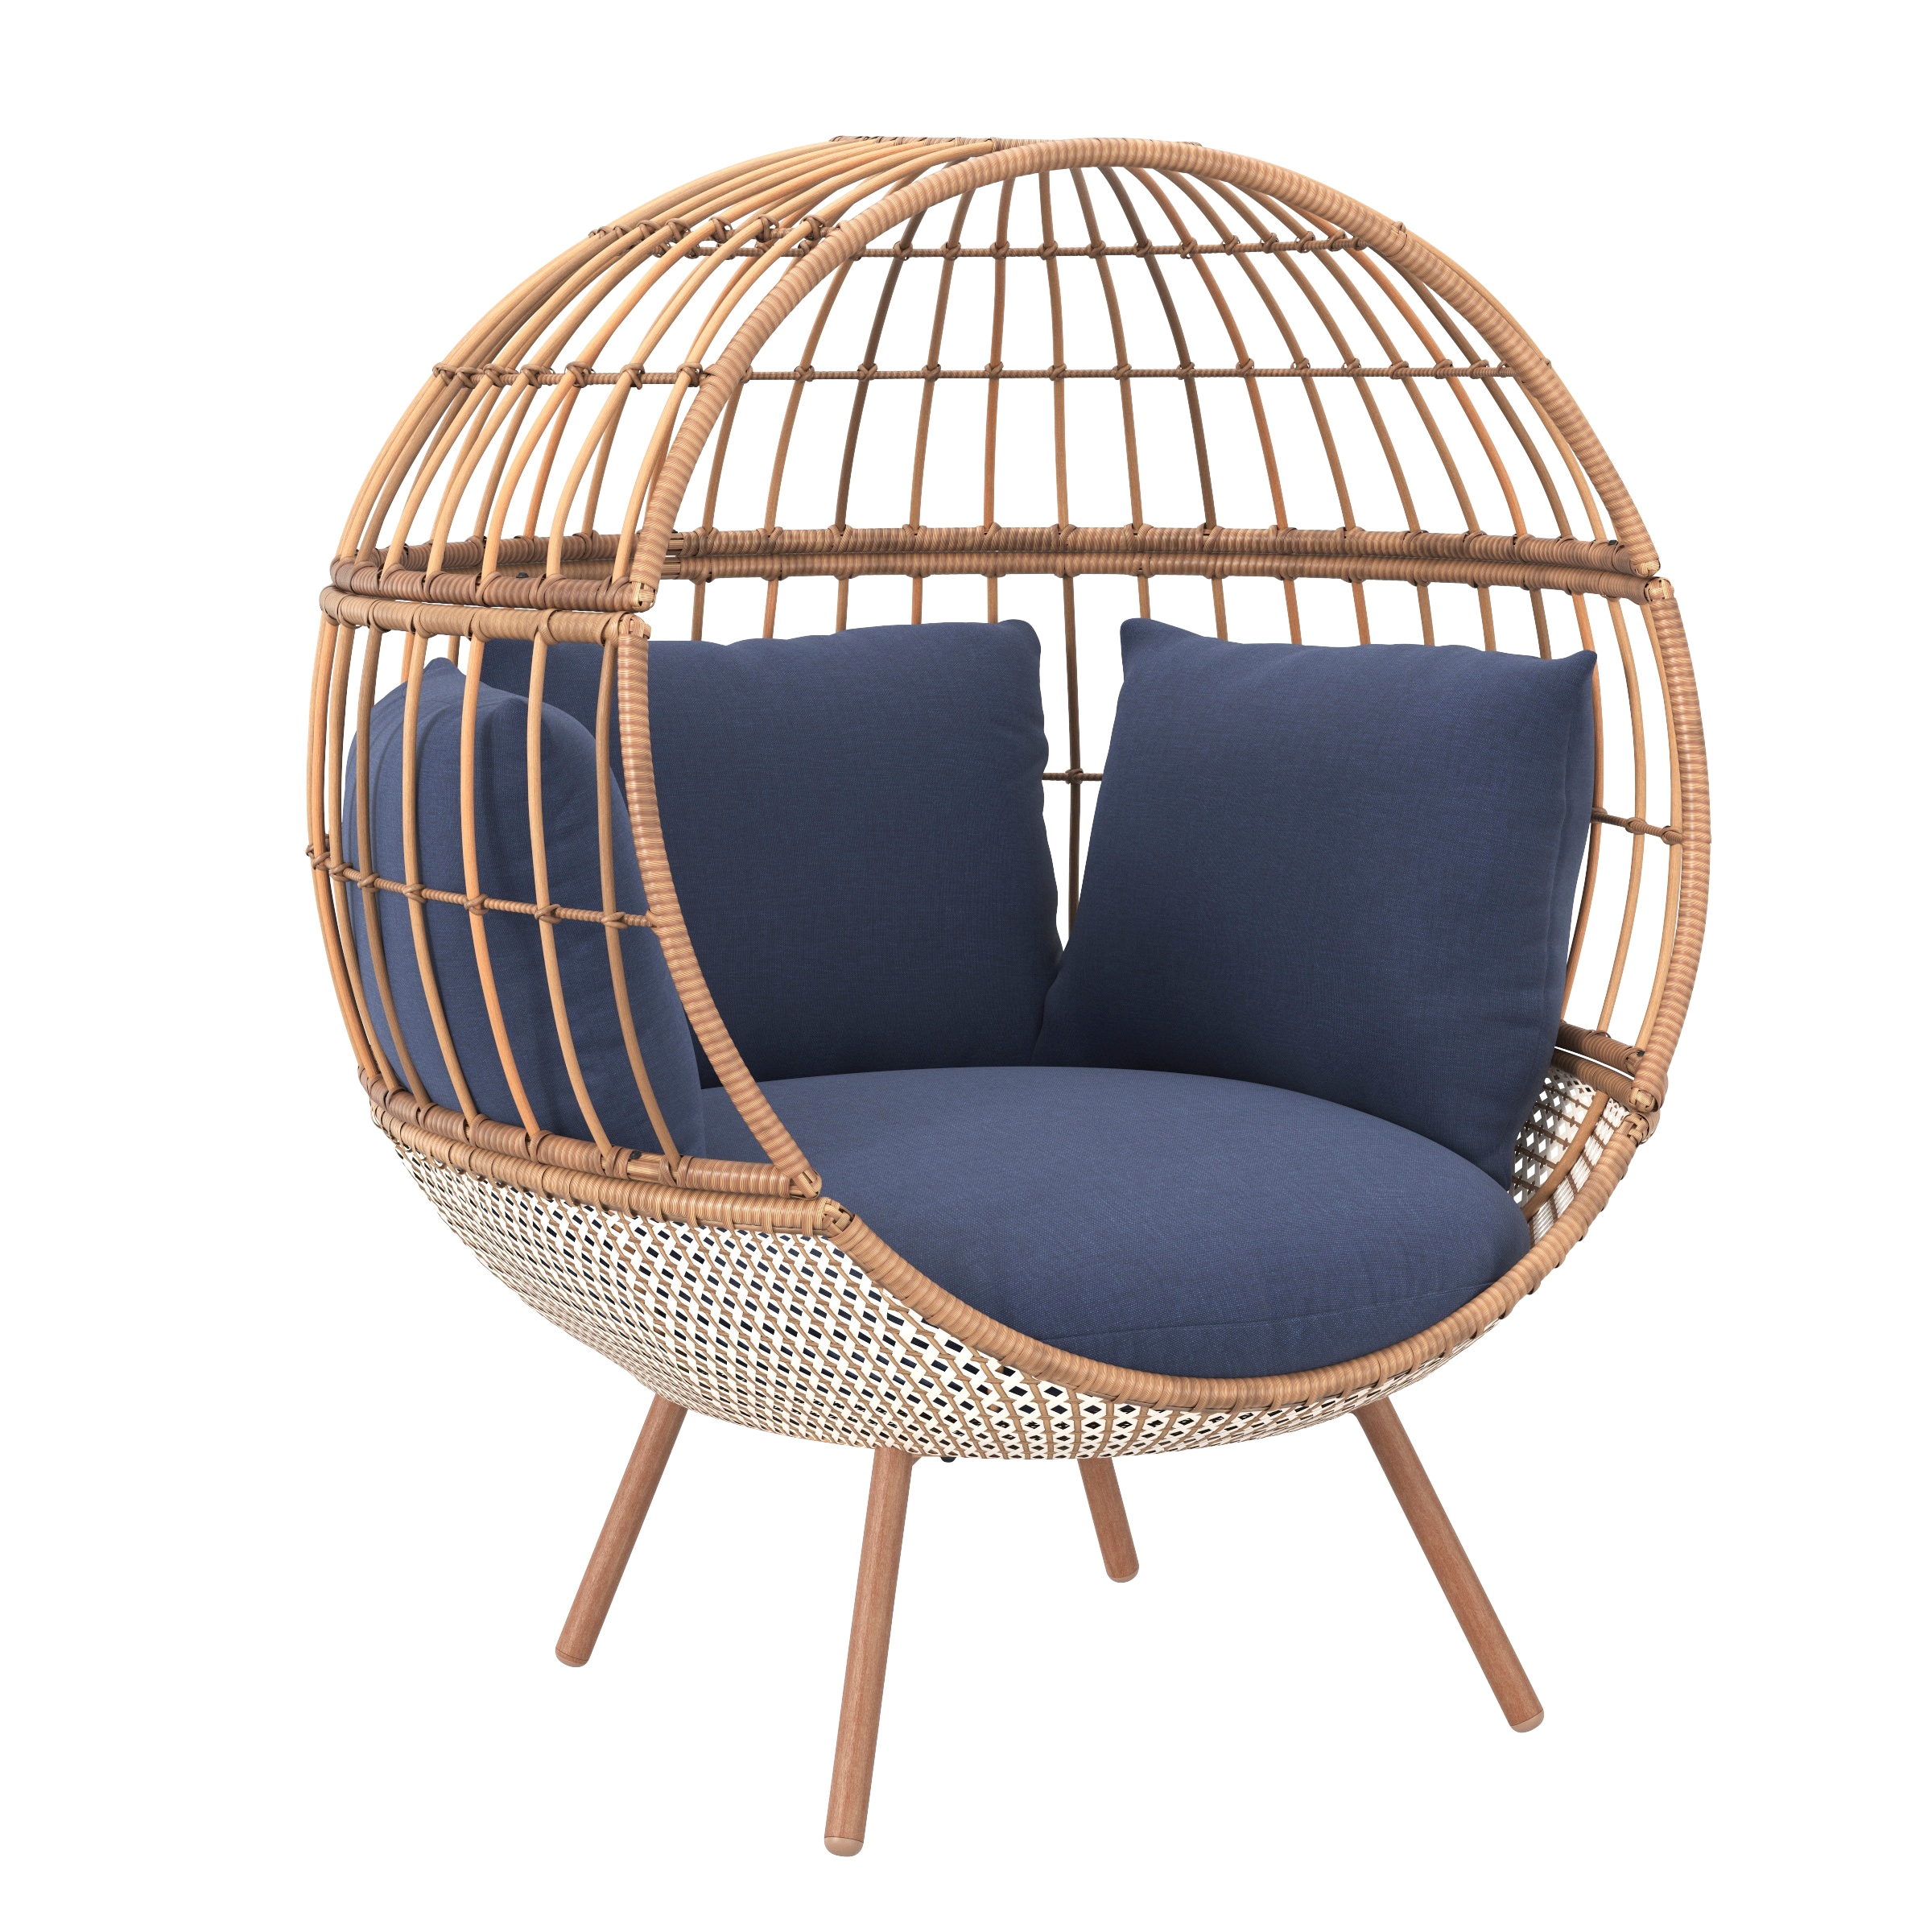 21 Woven Teak Frame Stationary Egg Chair(s) with Blue Cushioned Seat in the Patio Chairs department Lowes.com